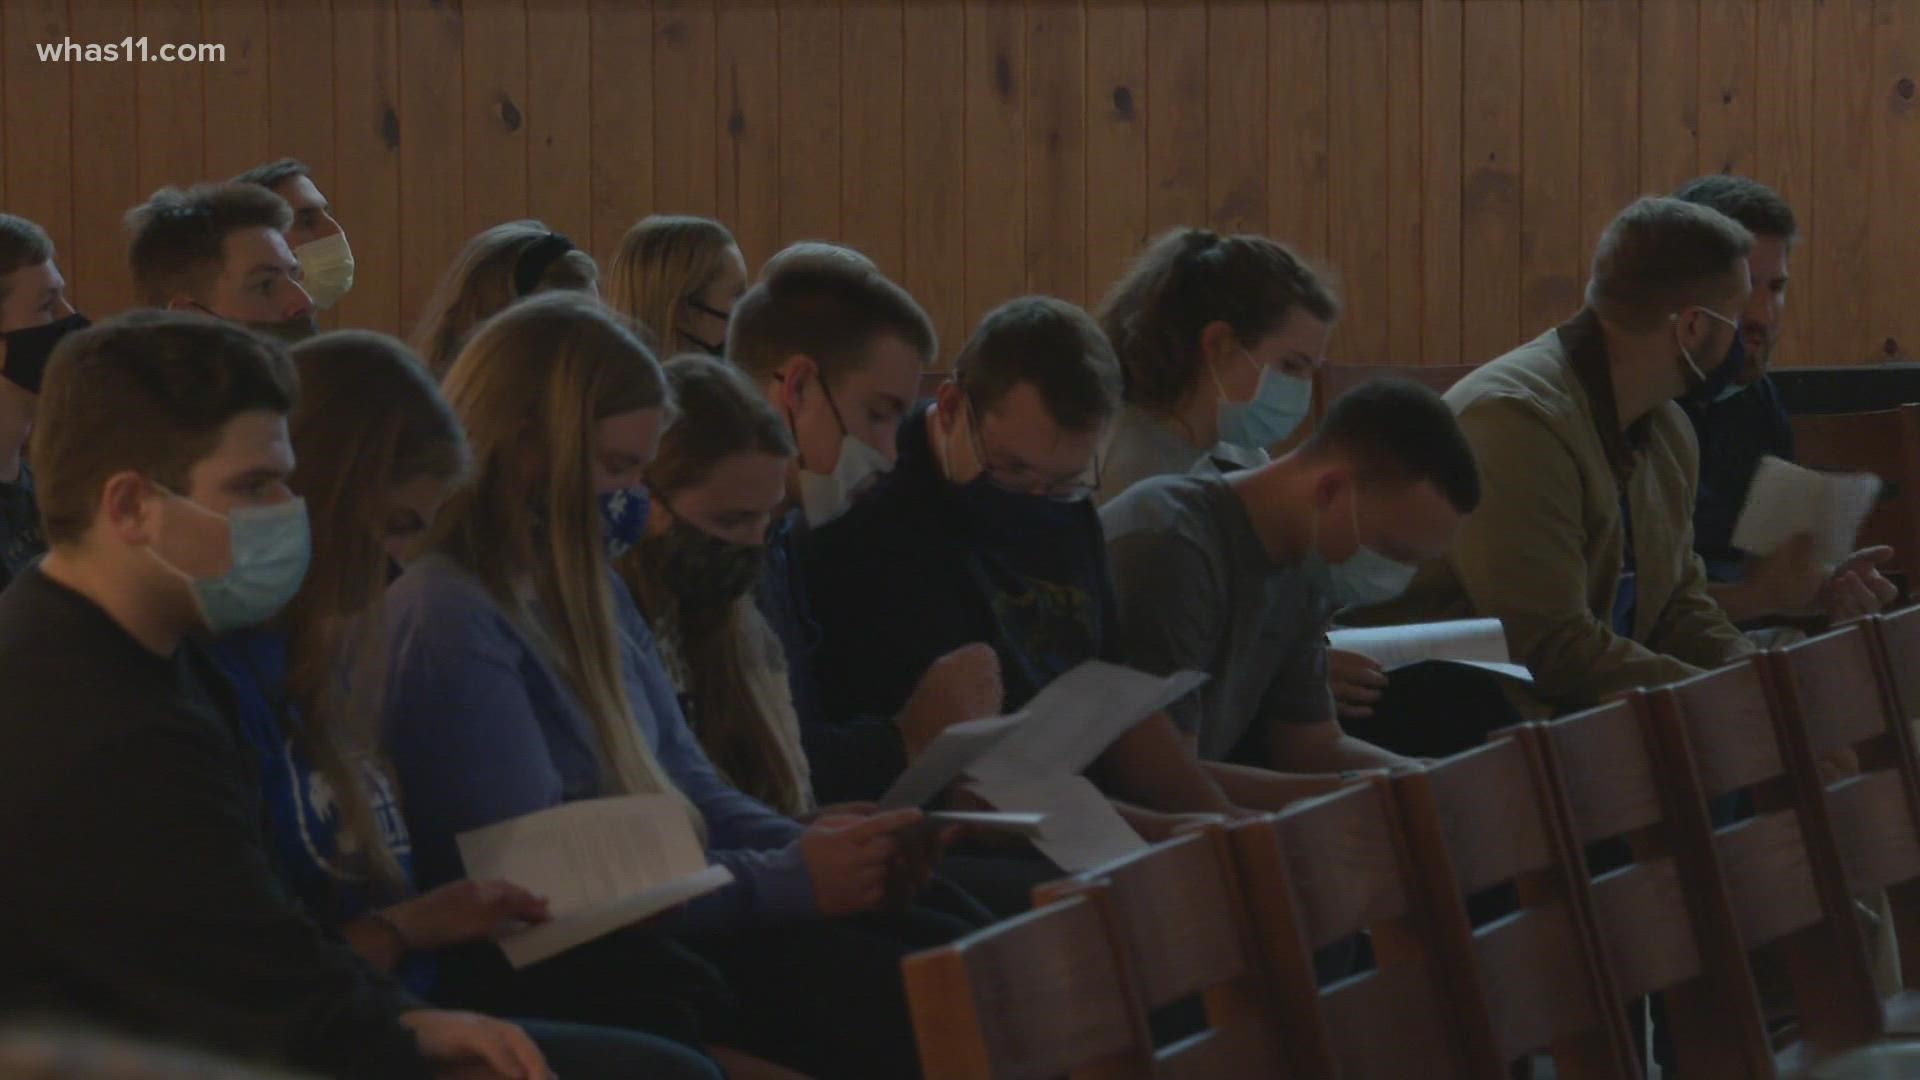 Students helped coordinate a prayer service and memorial mass on campus.